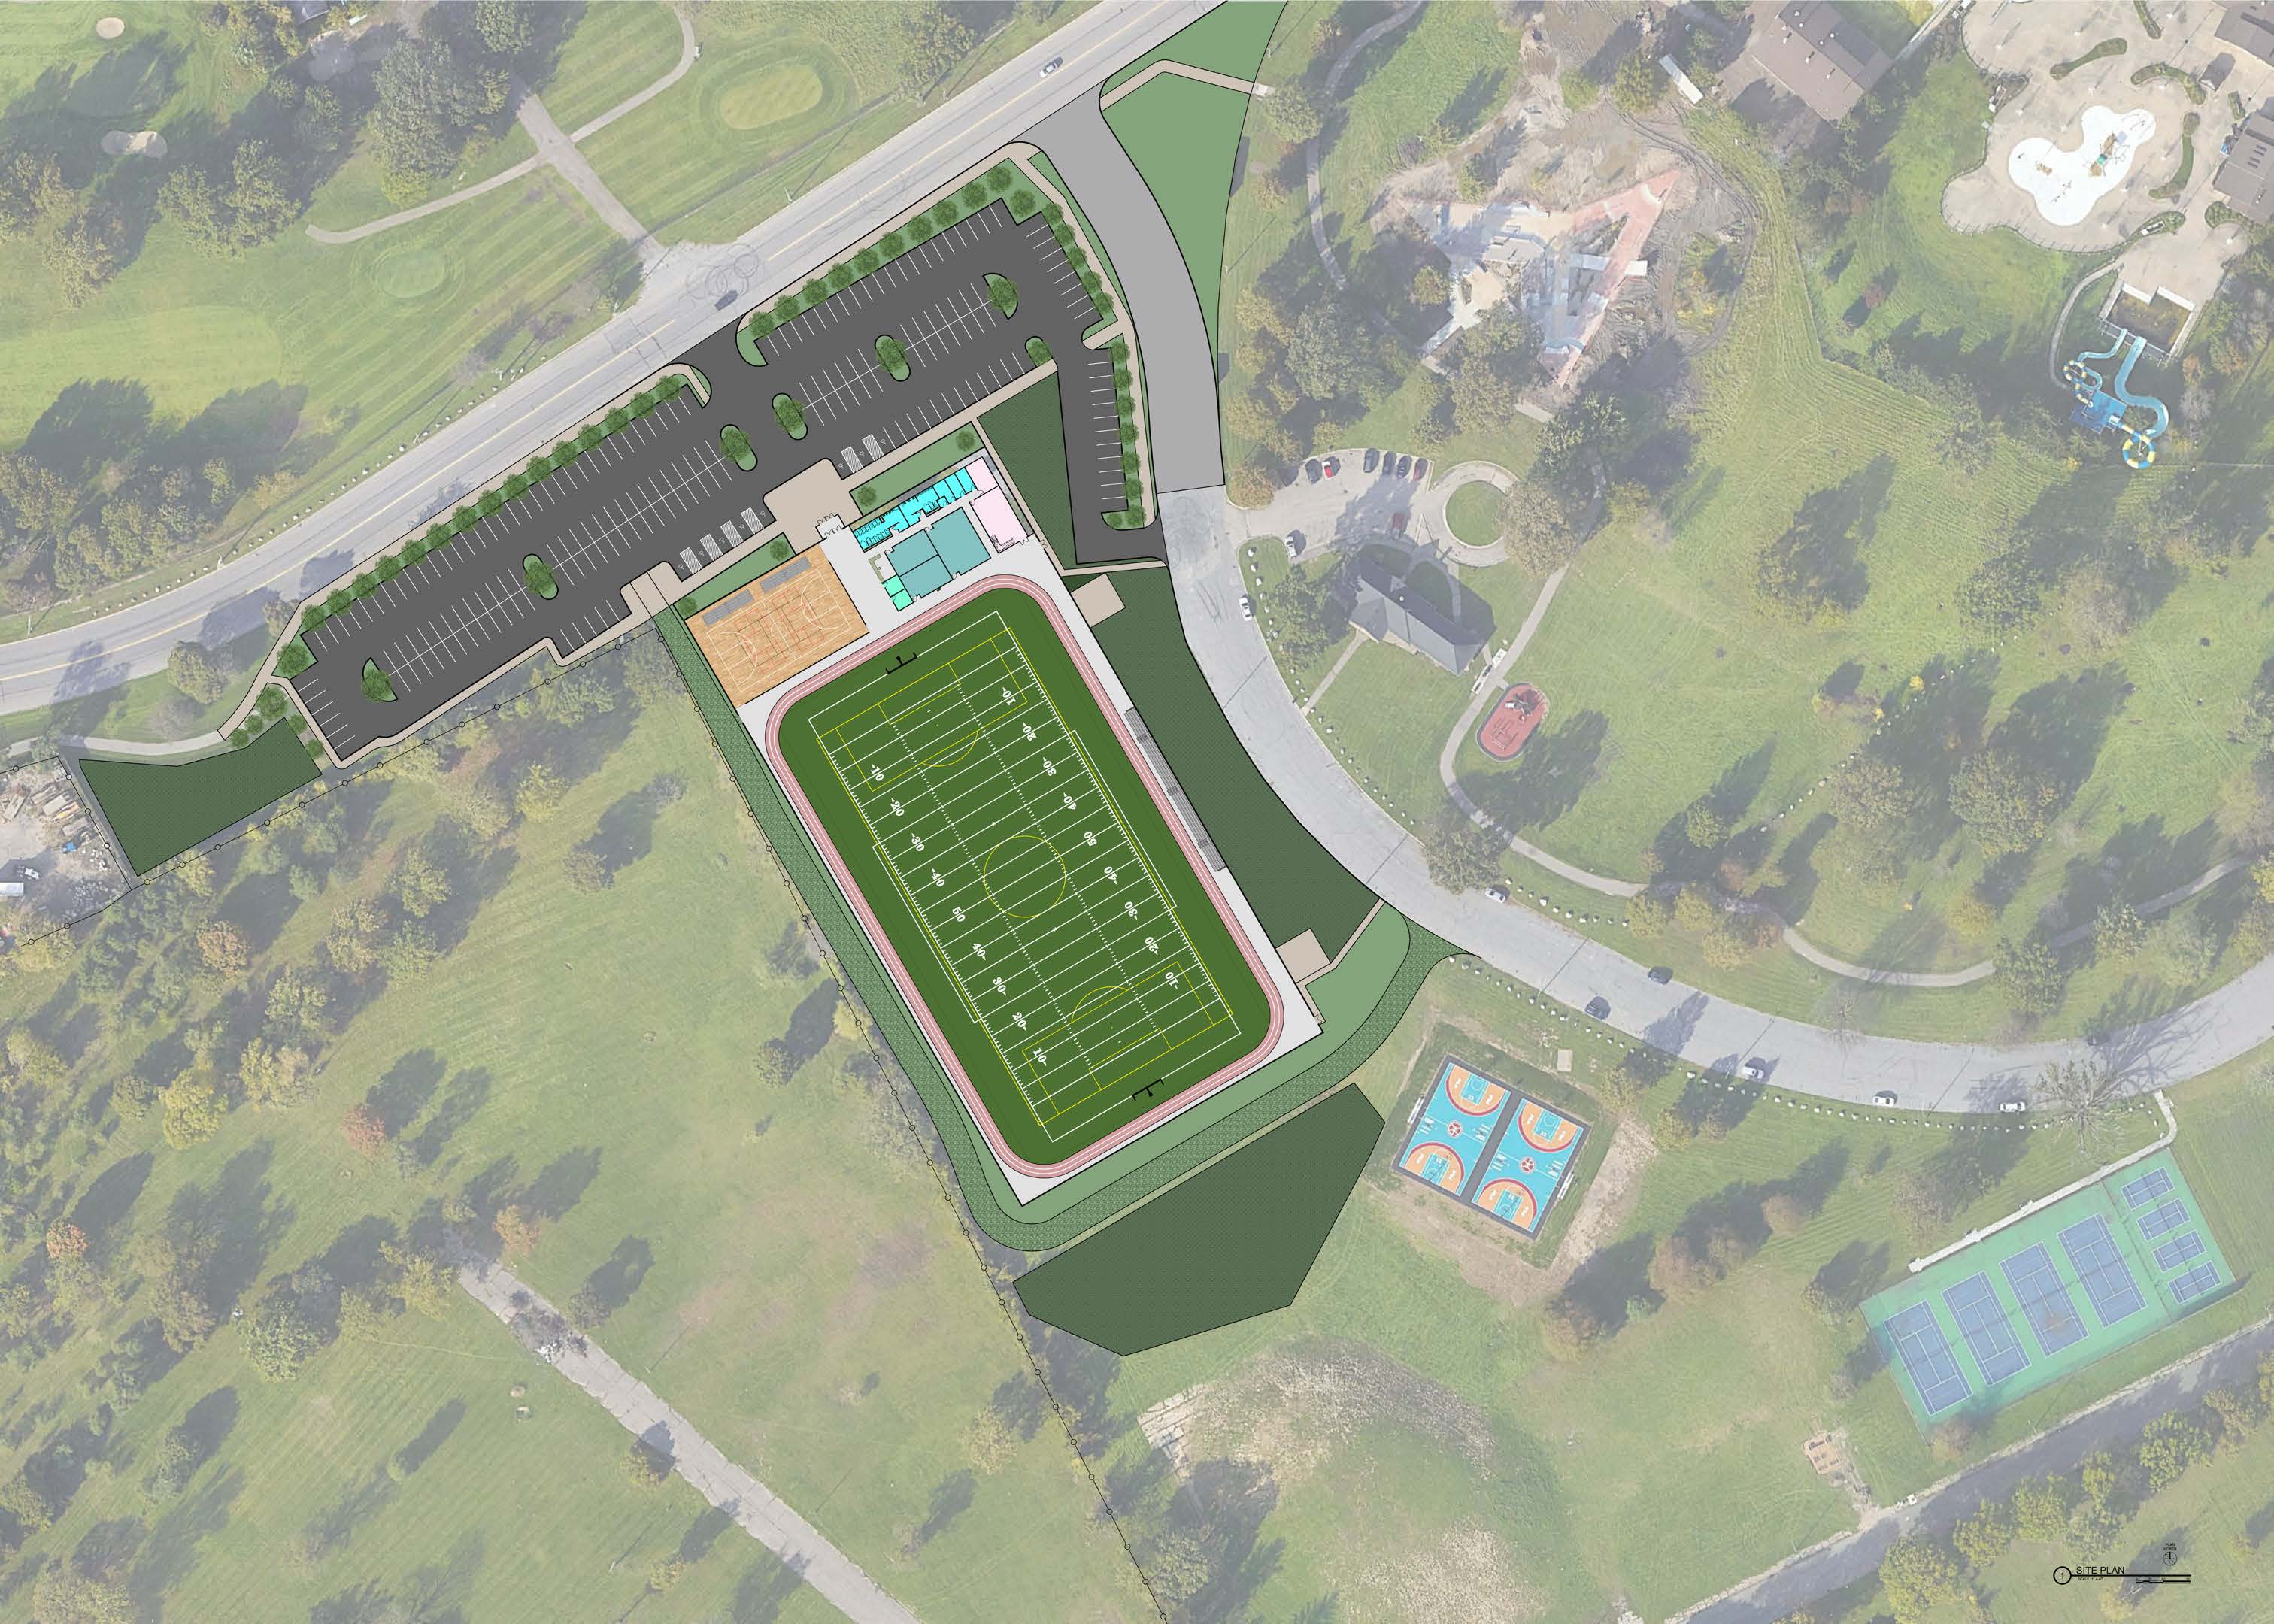 Site plan for the new rec facility at Chandler Park